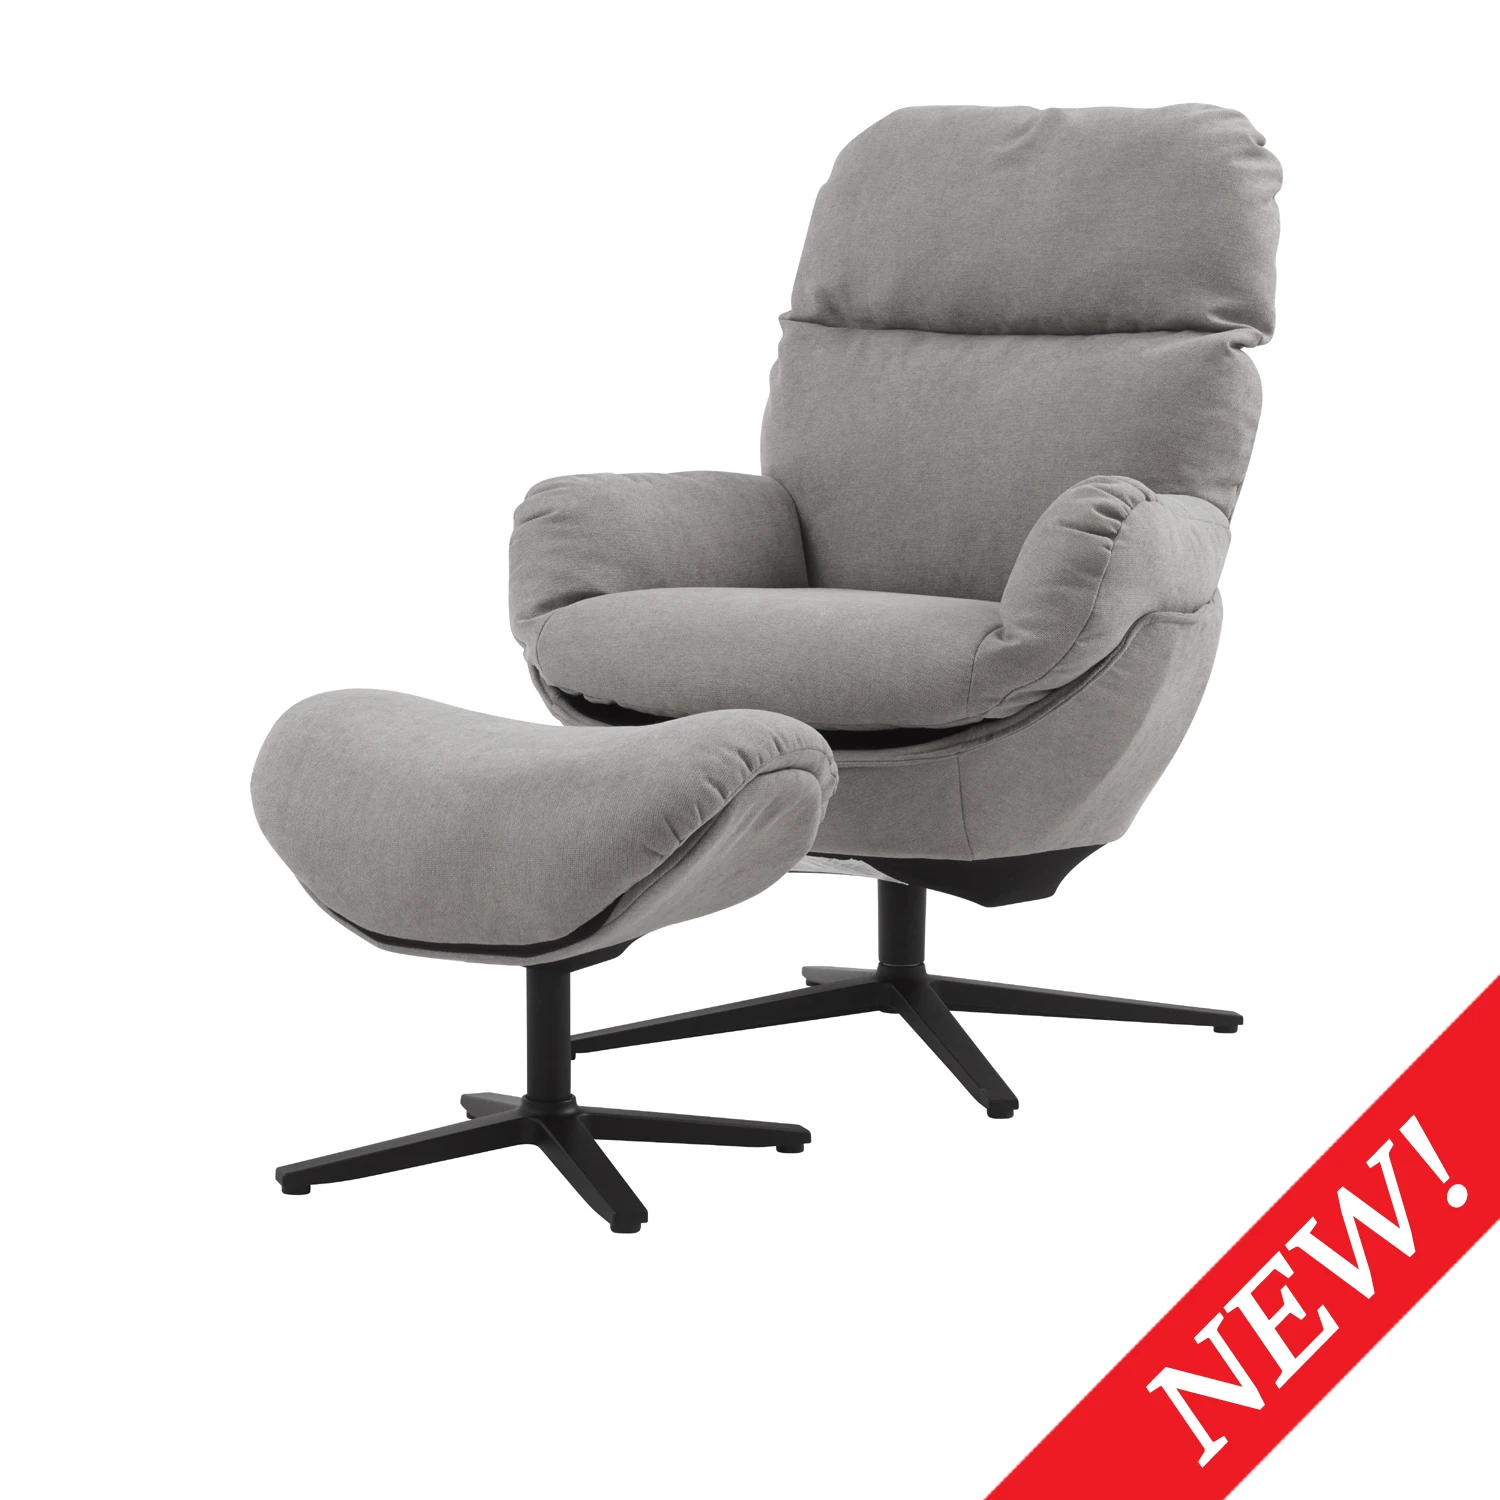 

Swivel Lounge Chair Glider Chair Accent Lazy Recliner W/Arm&Rocking Ottoman Aluminum Alloy Base Comfy Fabric Leisure Sofa[US-W]